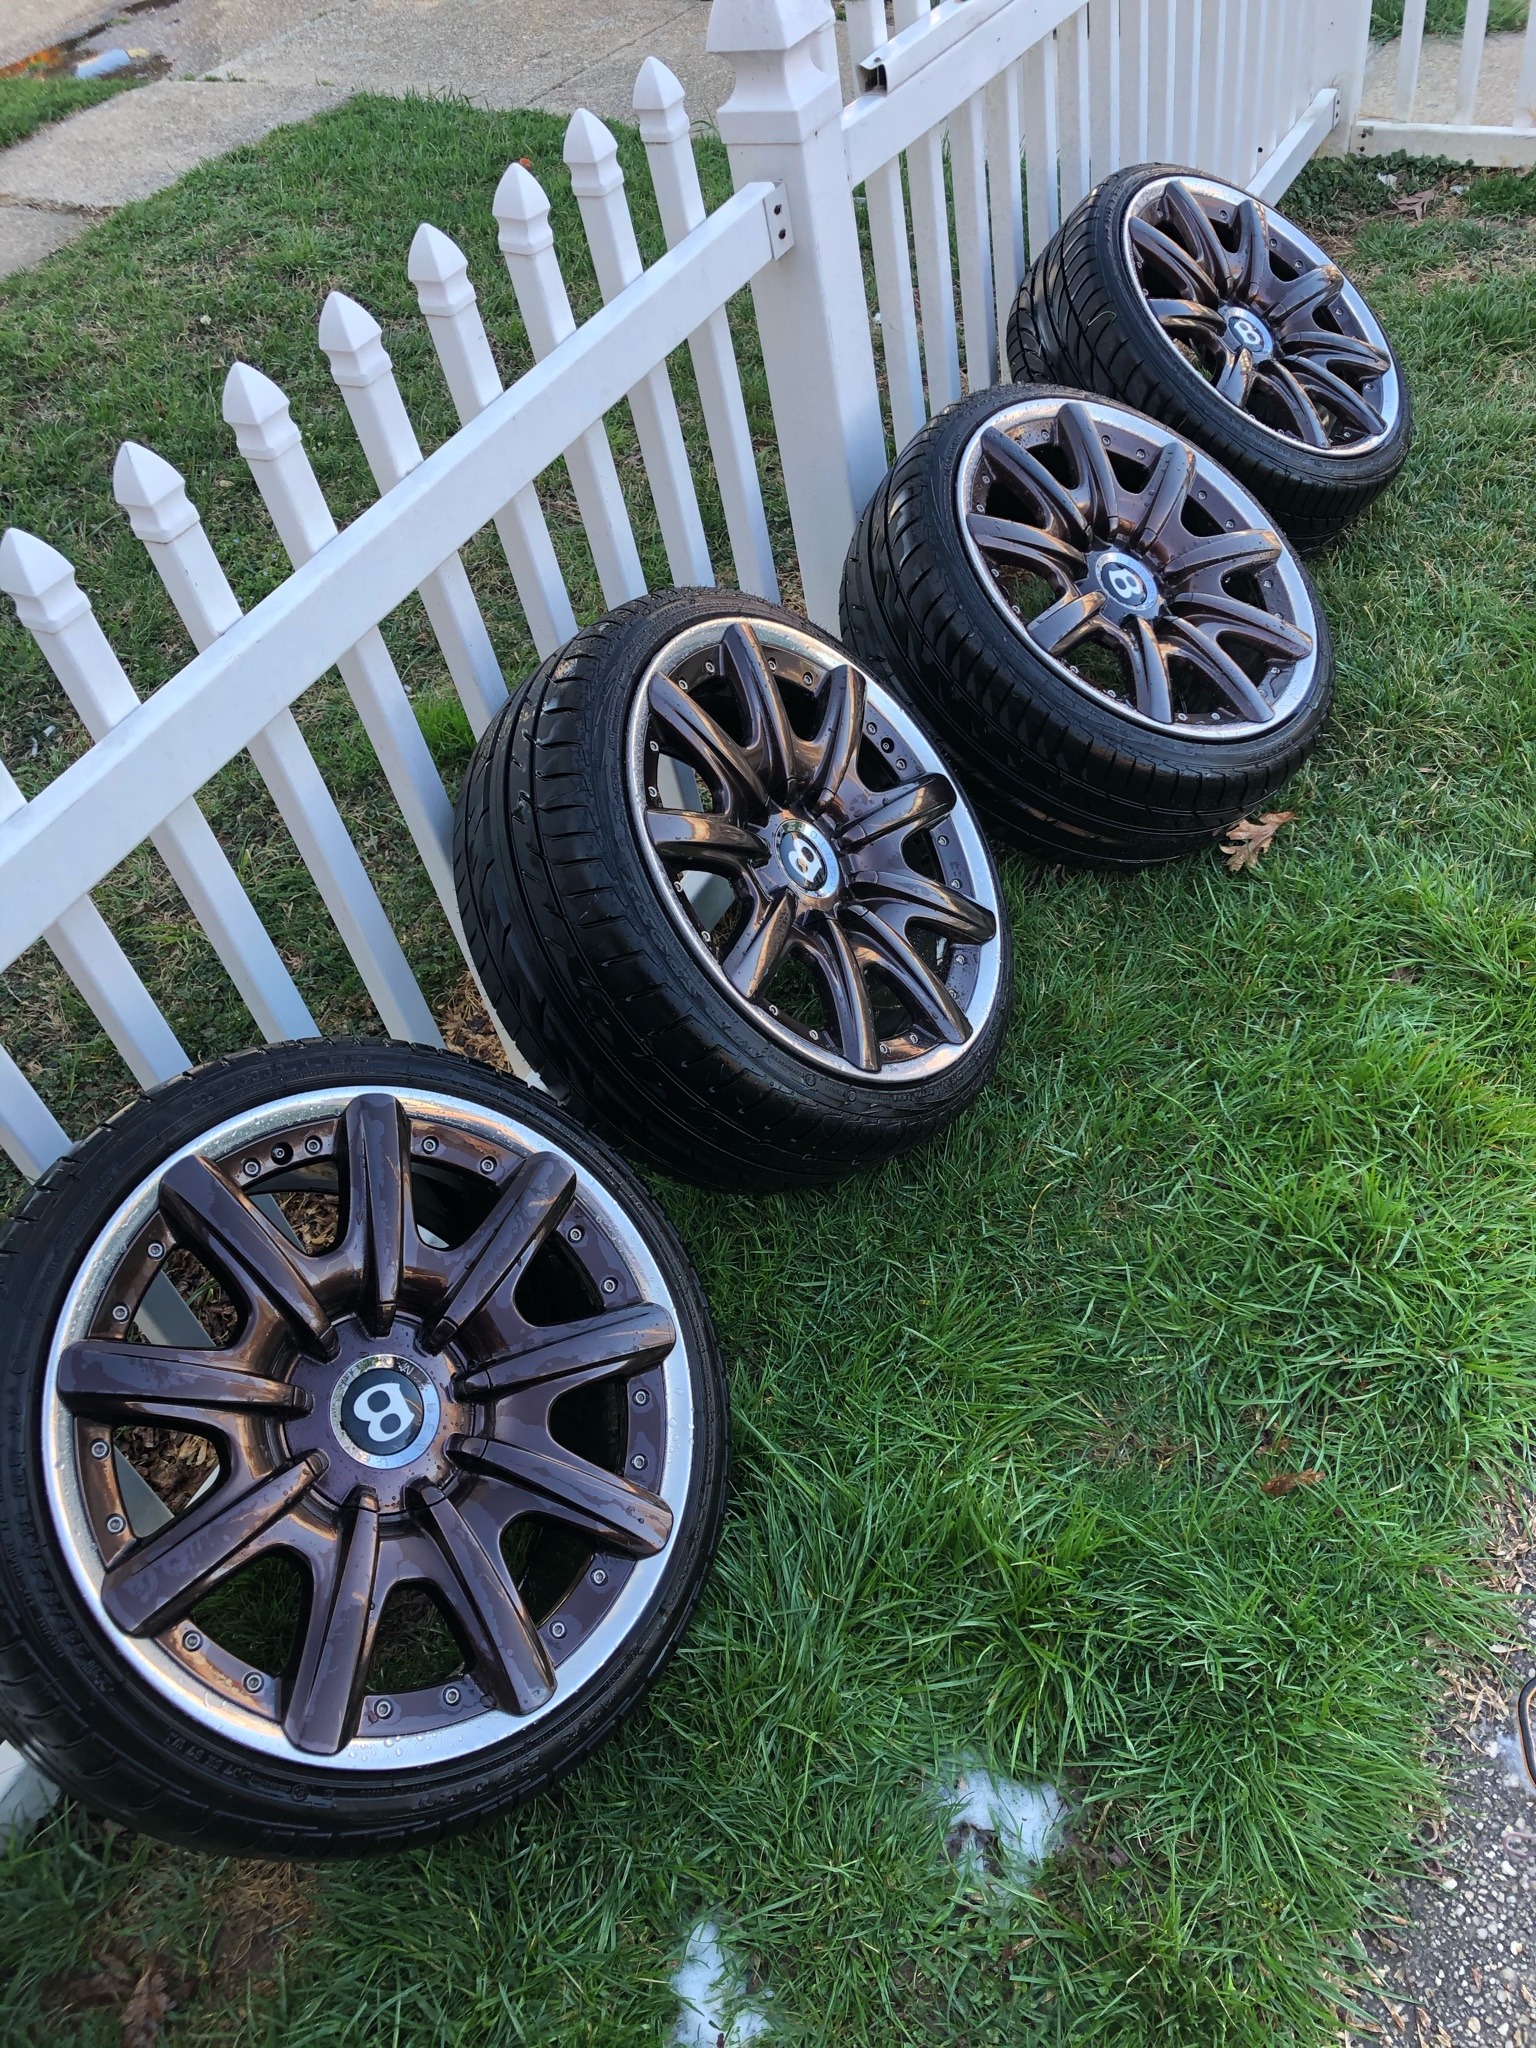 bmorel3git:Selling the Bentley wheels tomorrow porn pictures